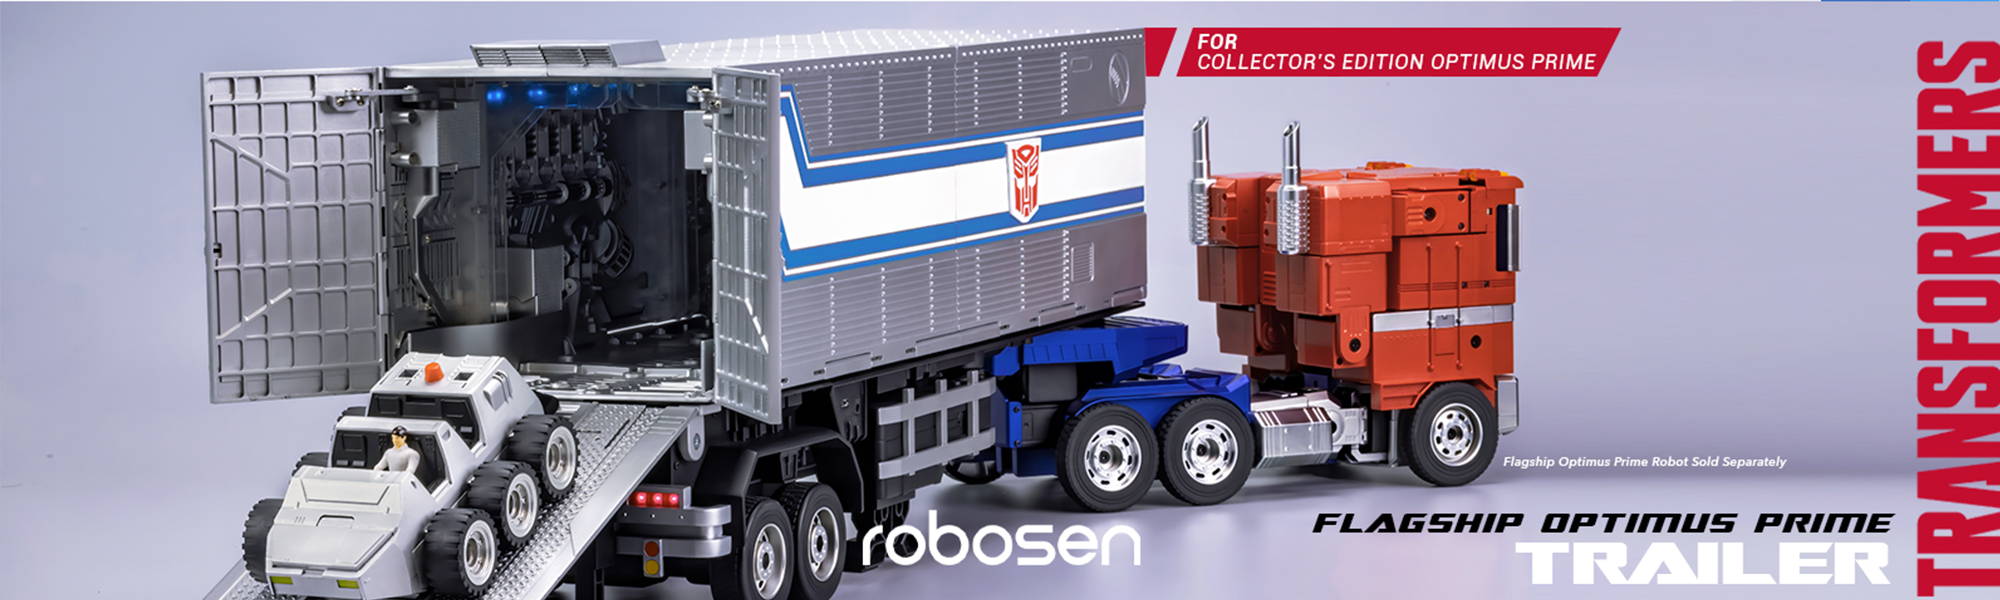 Transformers Optimus Prime Trailer with Roller – – Hasbro